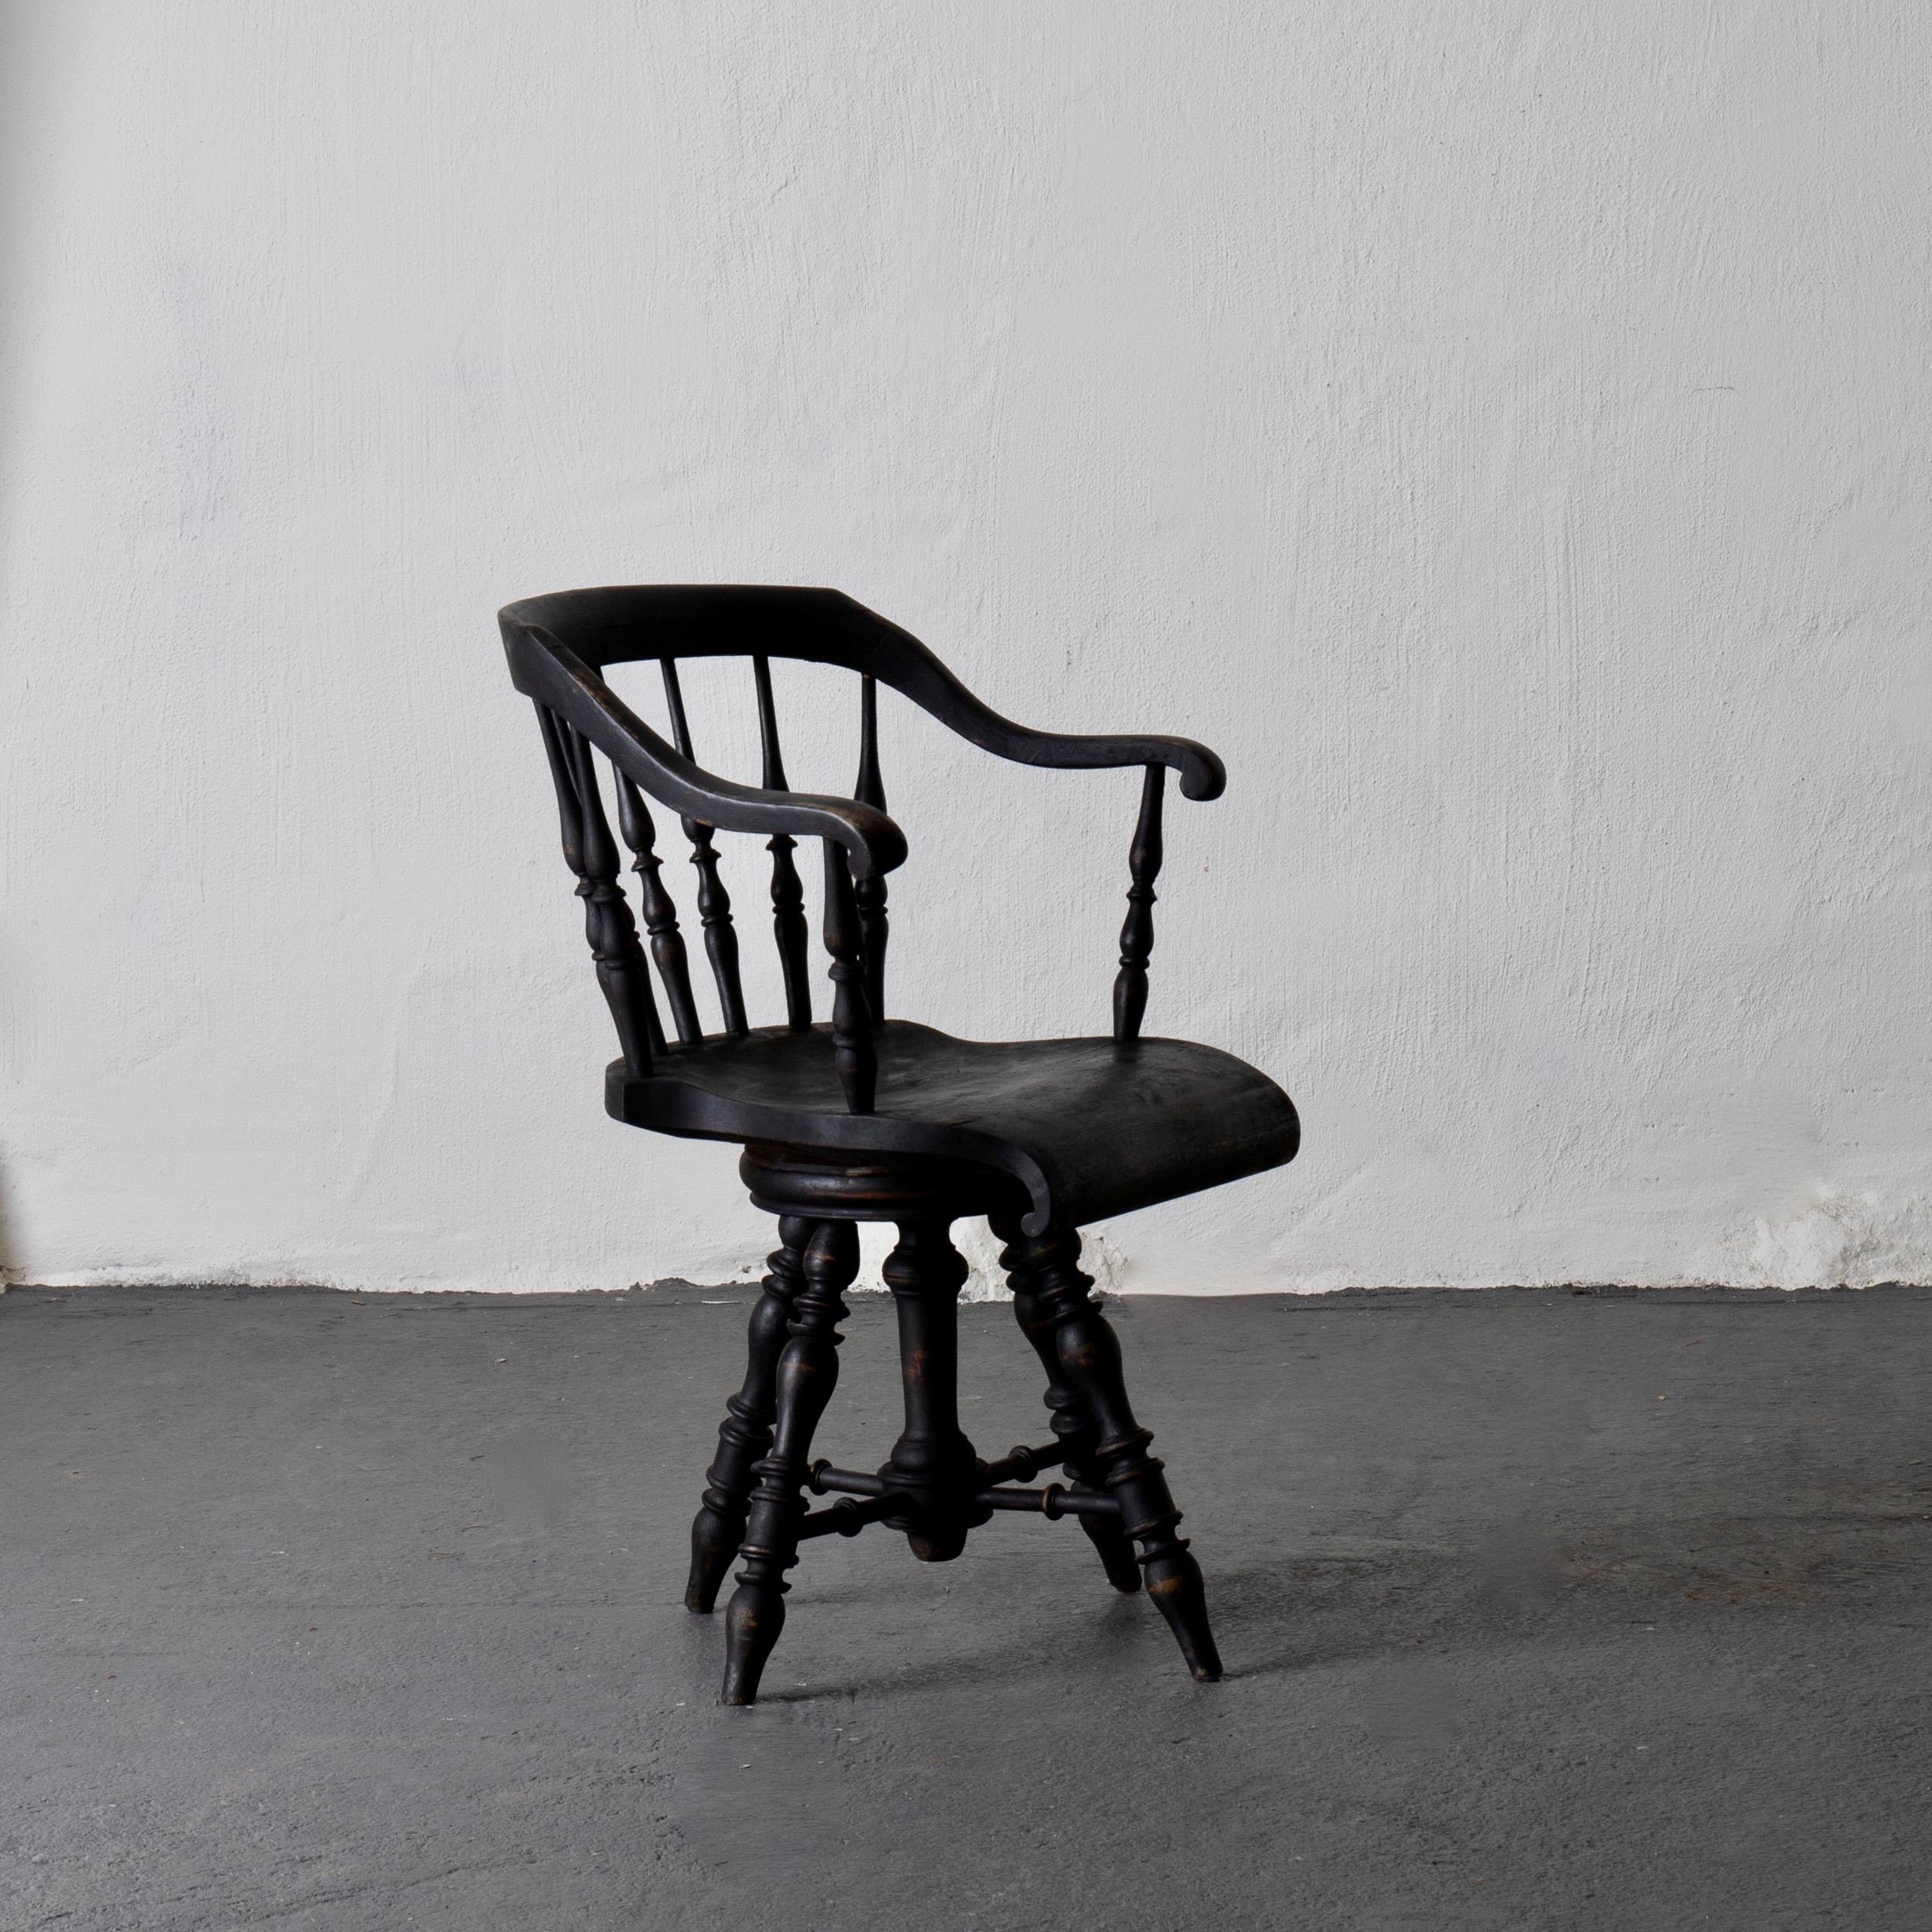 Armchair Captain's chair black Swedish 19th century Sweden. An armchair made during the end of 19th century. Painted in our signature Laserow Black.